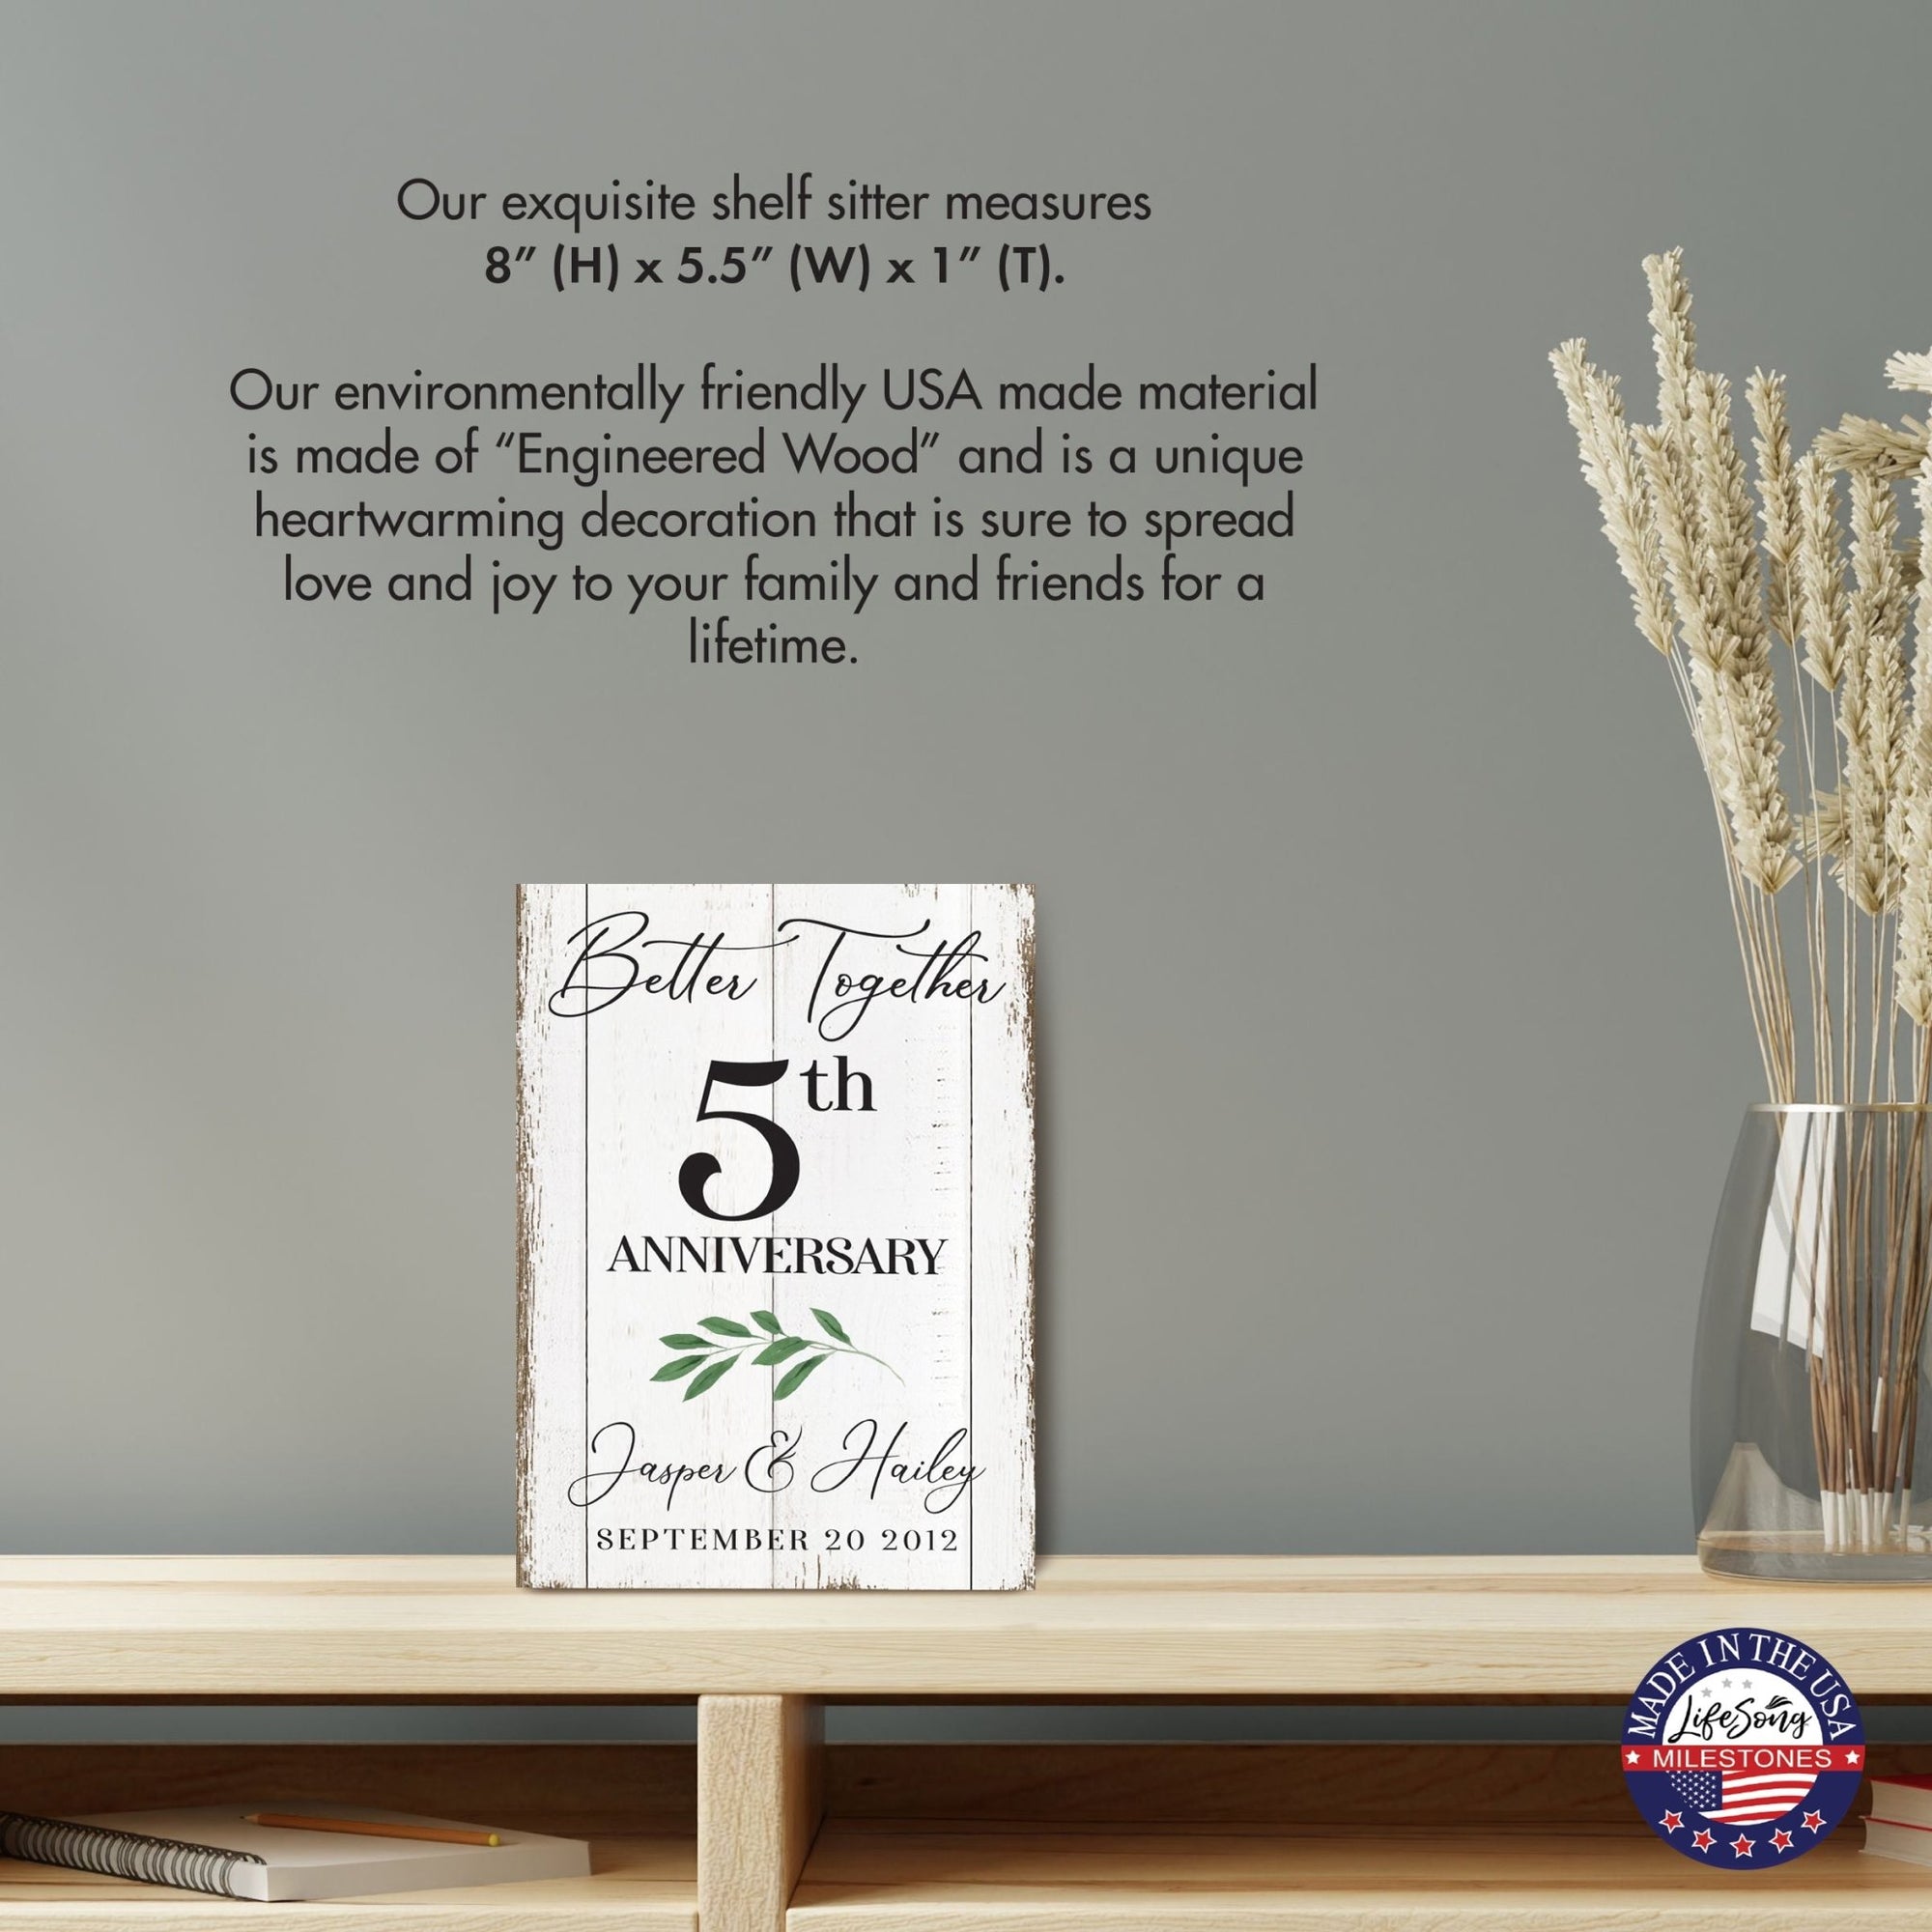 Wedding Anniversary Tabletop Home Decor - Elegant MDF wood sign with digital prints commemorating your 5th anniversary.